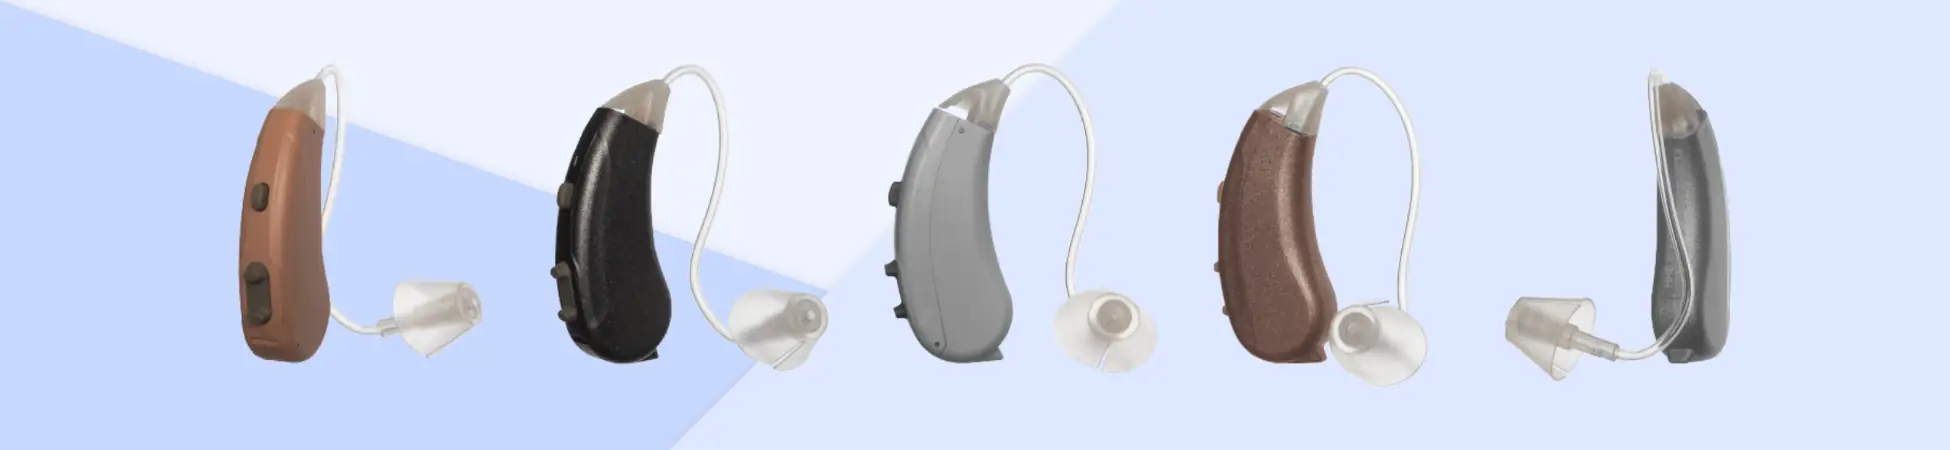 Products Lexie Hearing has to offer